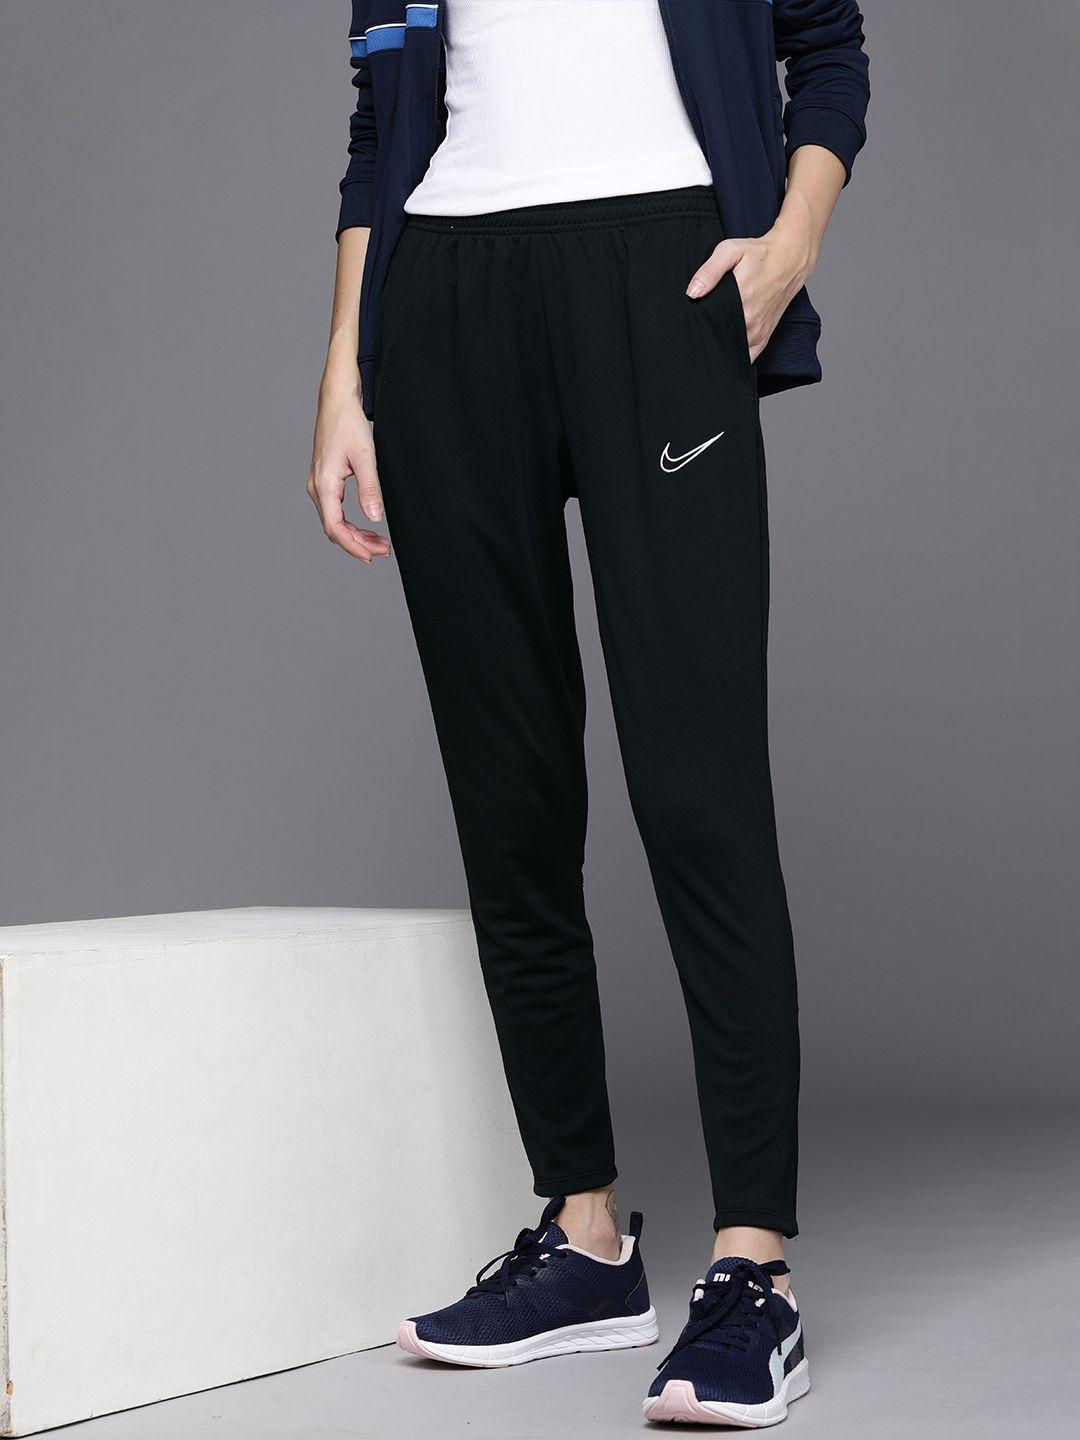 nike-men-black-solid-mid-rise-casual-track-pants